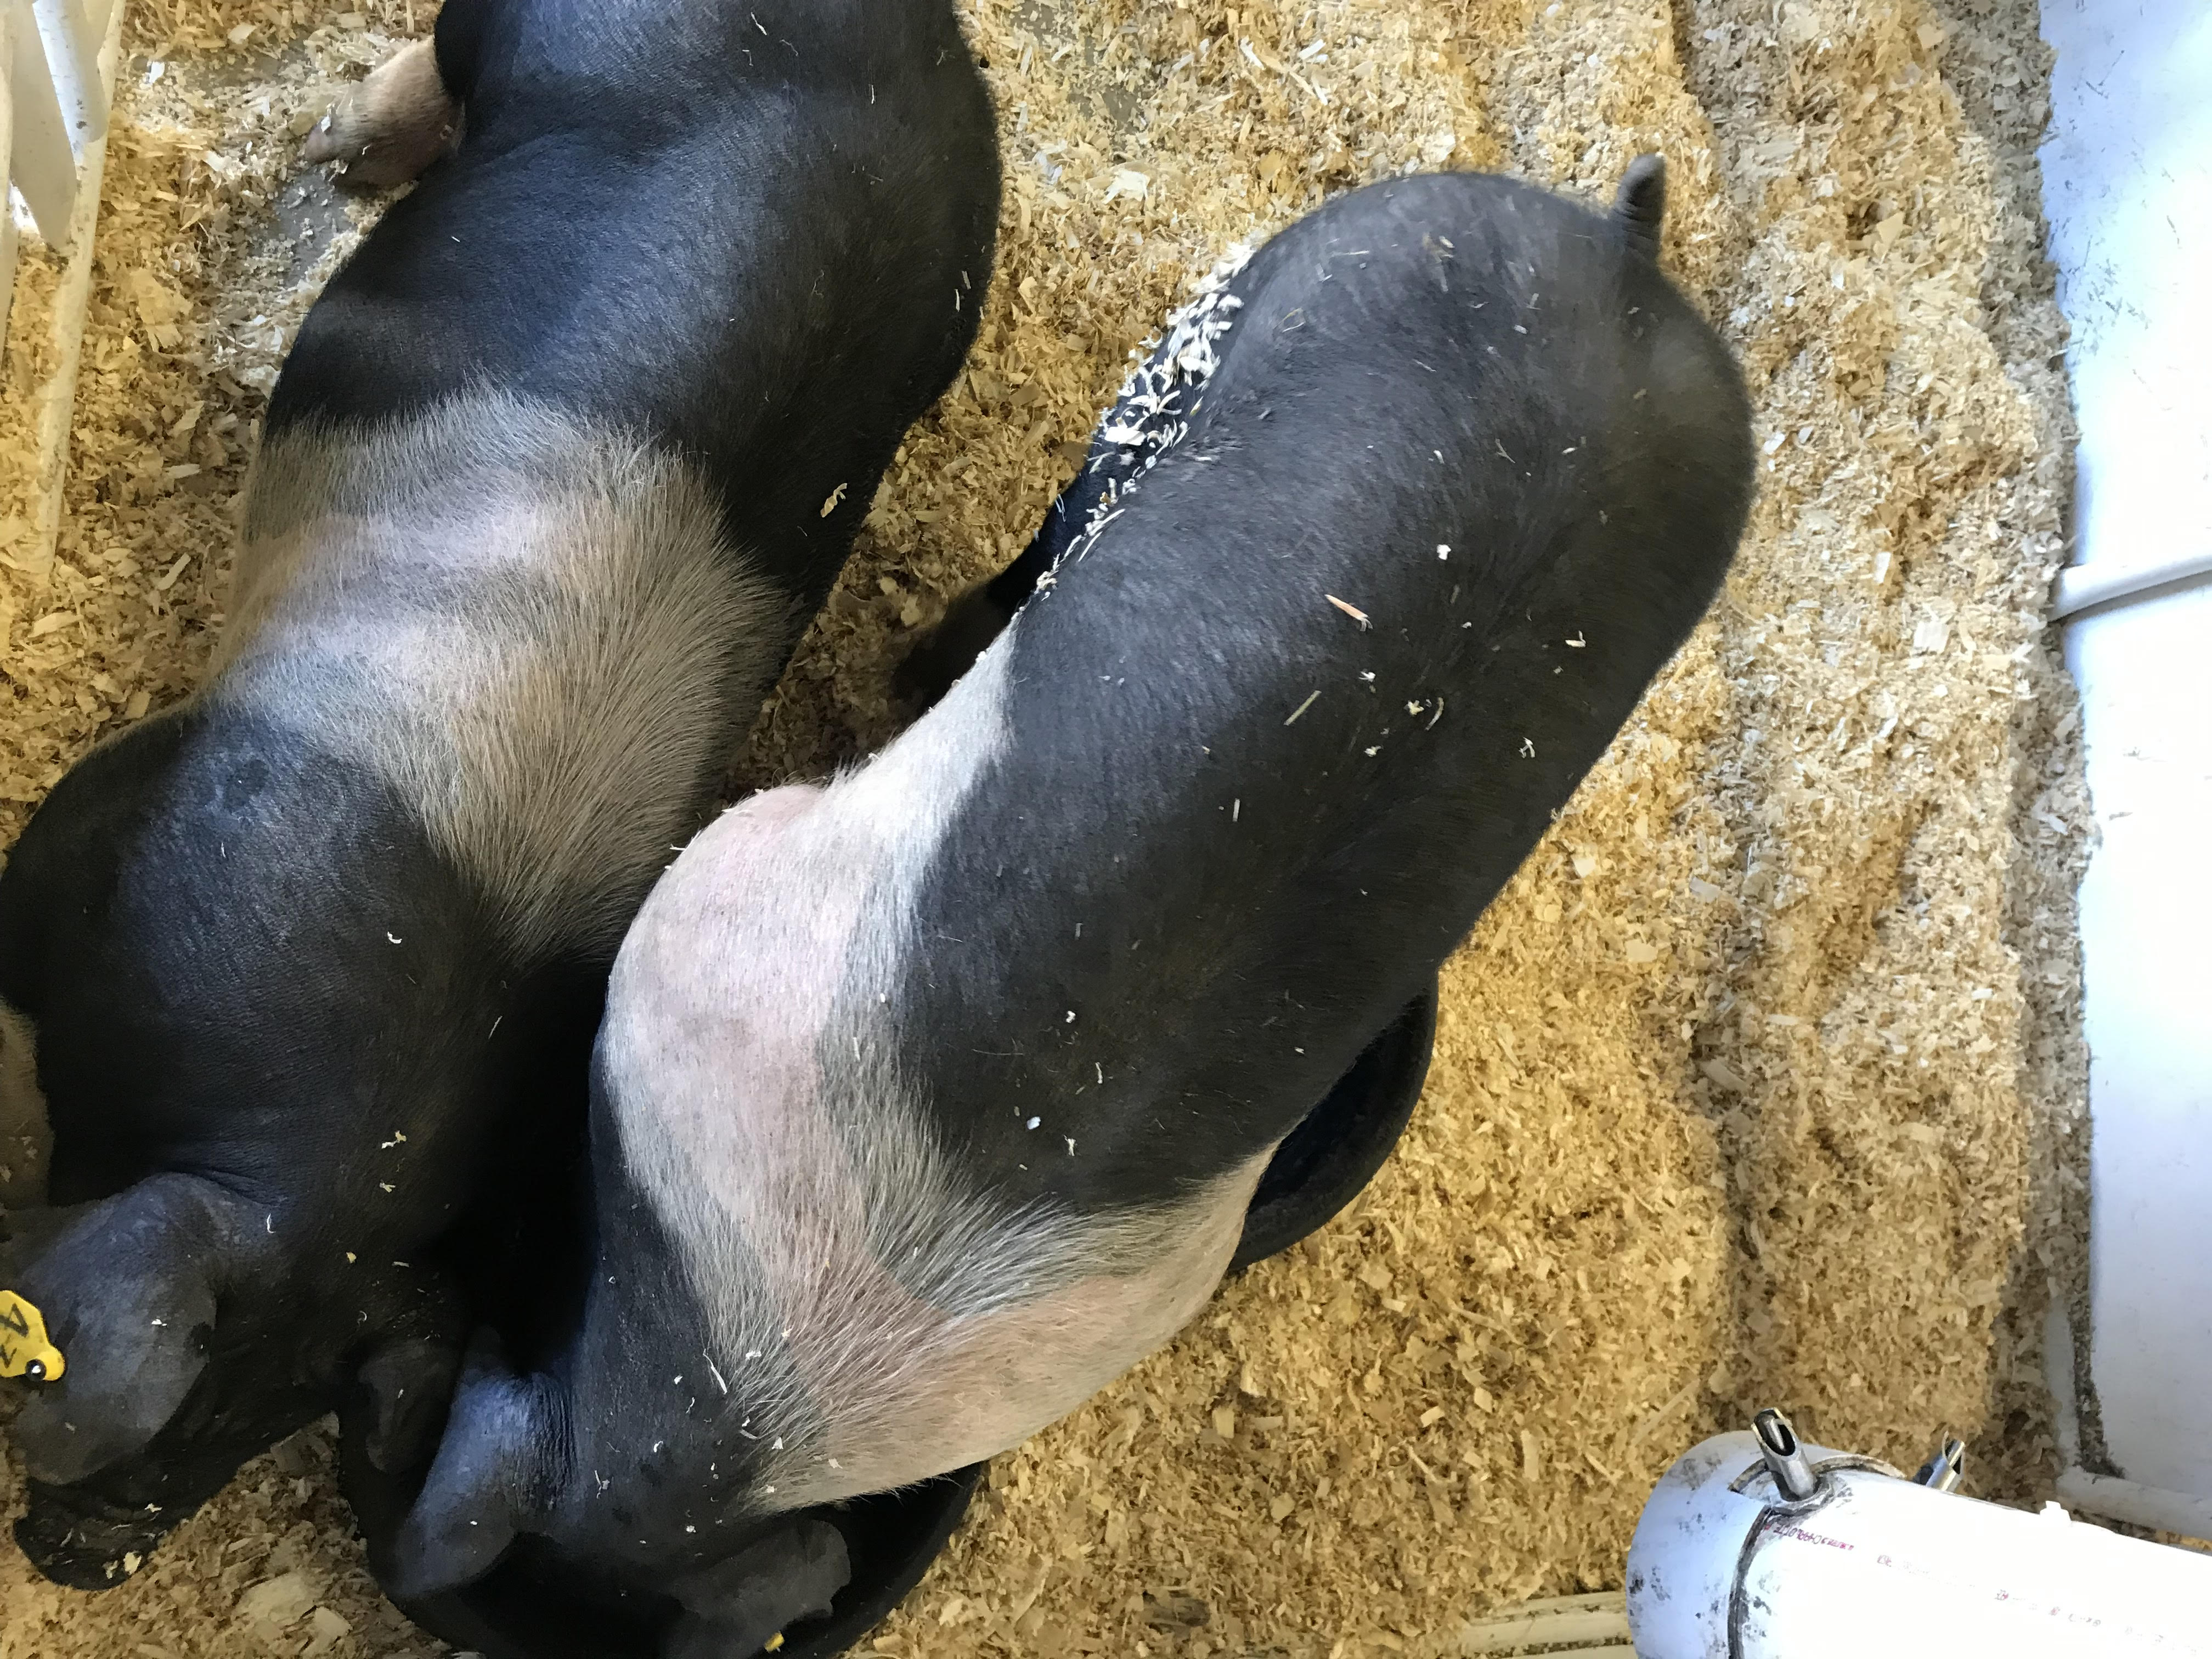 Morning Ag News, March 12, 2021: Pork industry works to rebound after COVID-19 pandemic